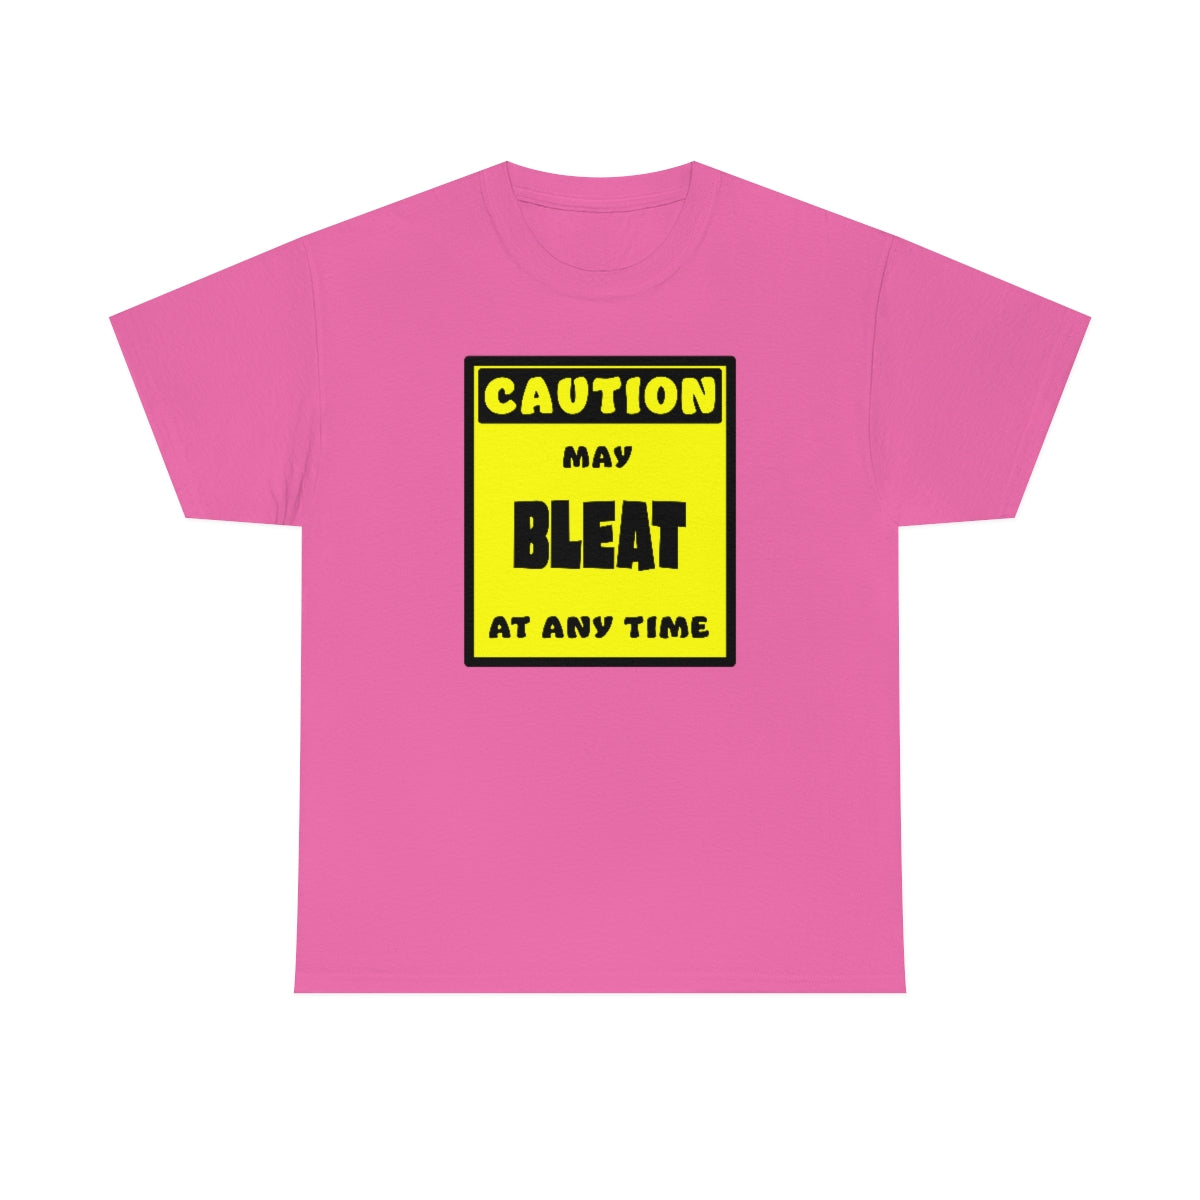 CAUTION! May BLEAT at any time! - T-Shirt T-Shirt AFLT-Whootorca Pink S 